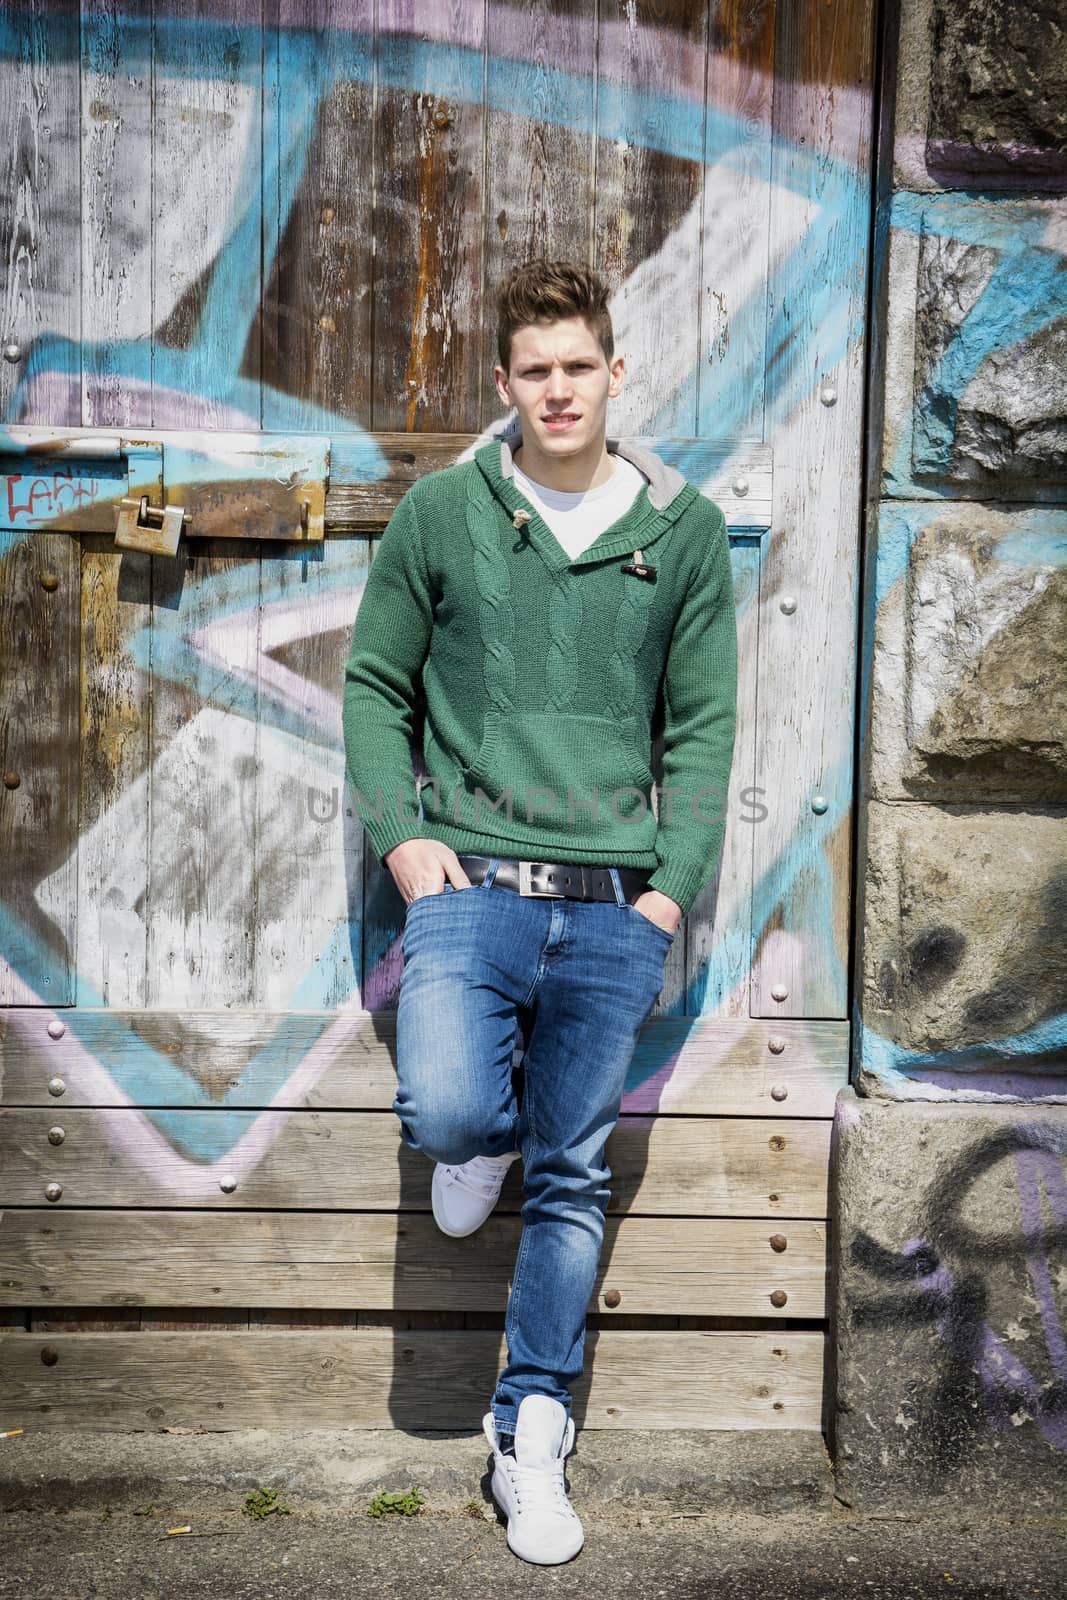 Full body shot of young man in front of graffiti by artofphoto